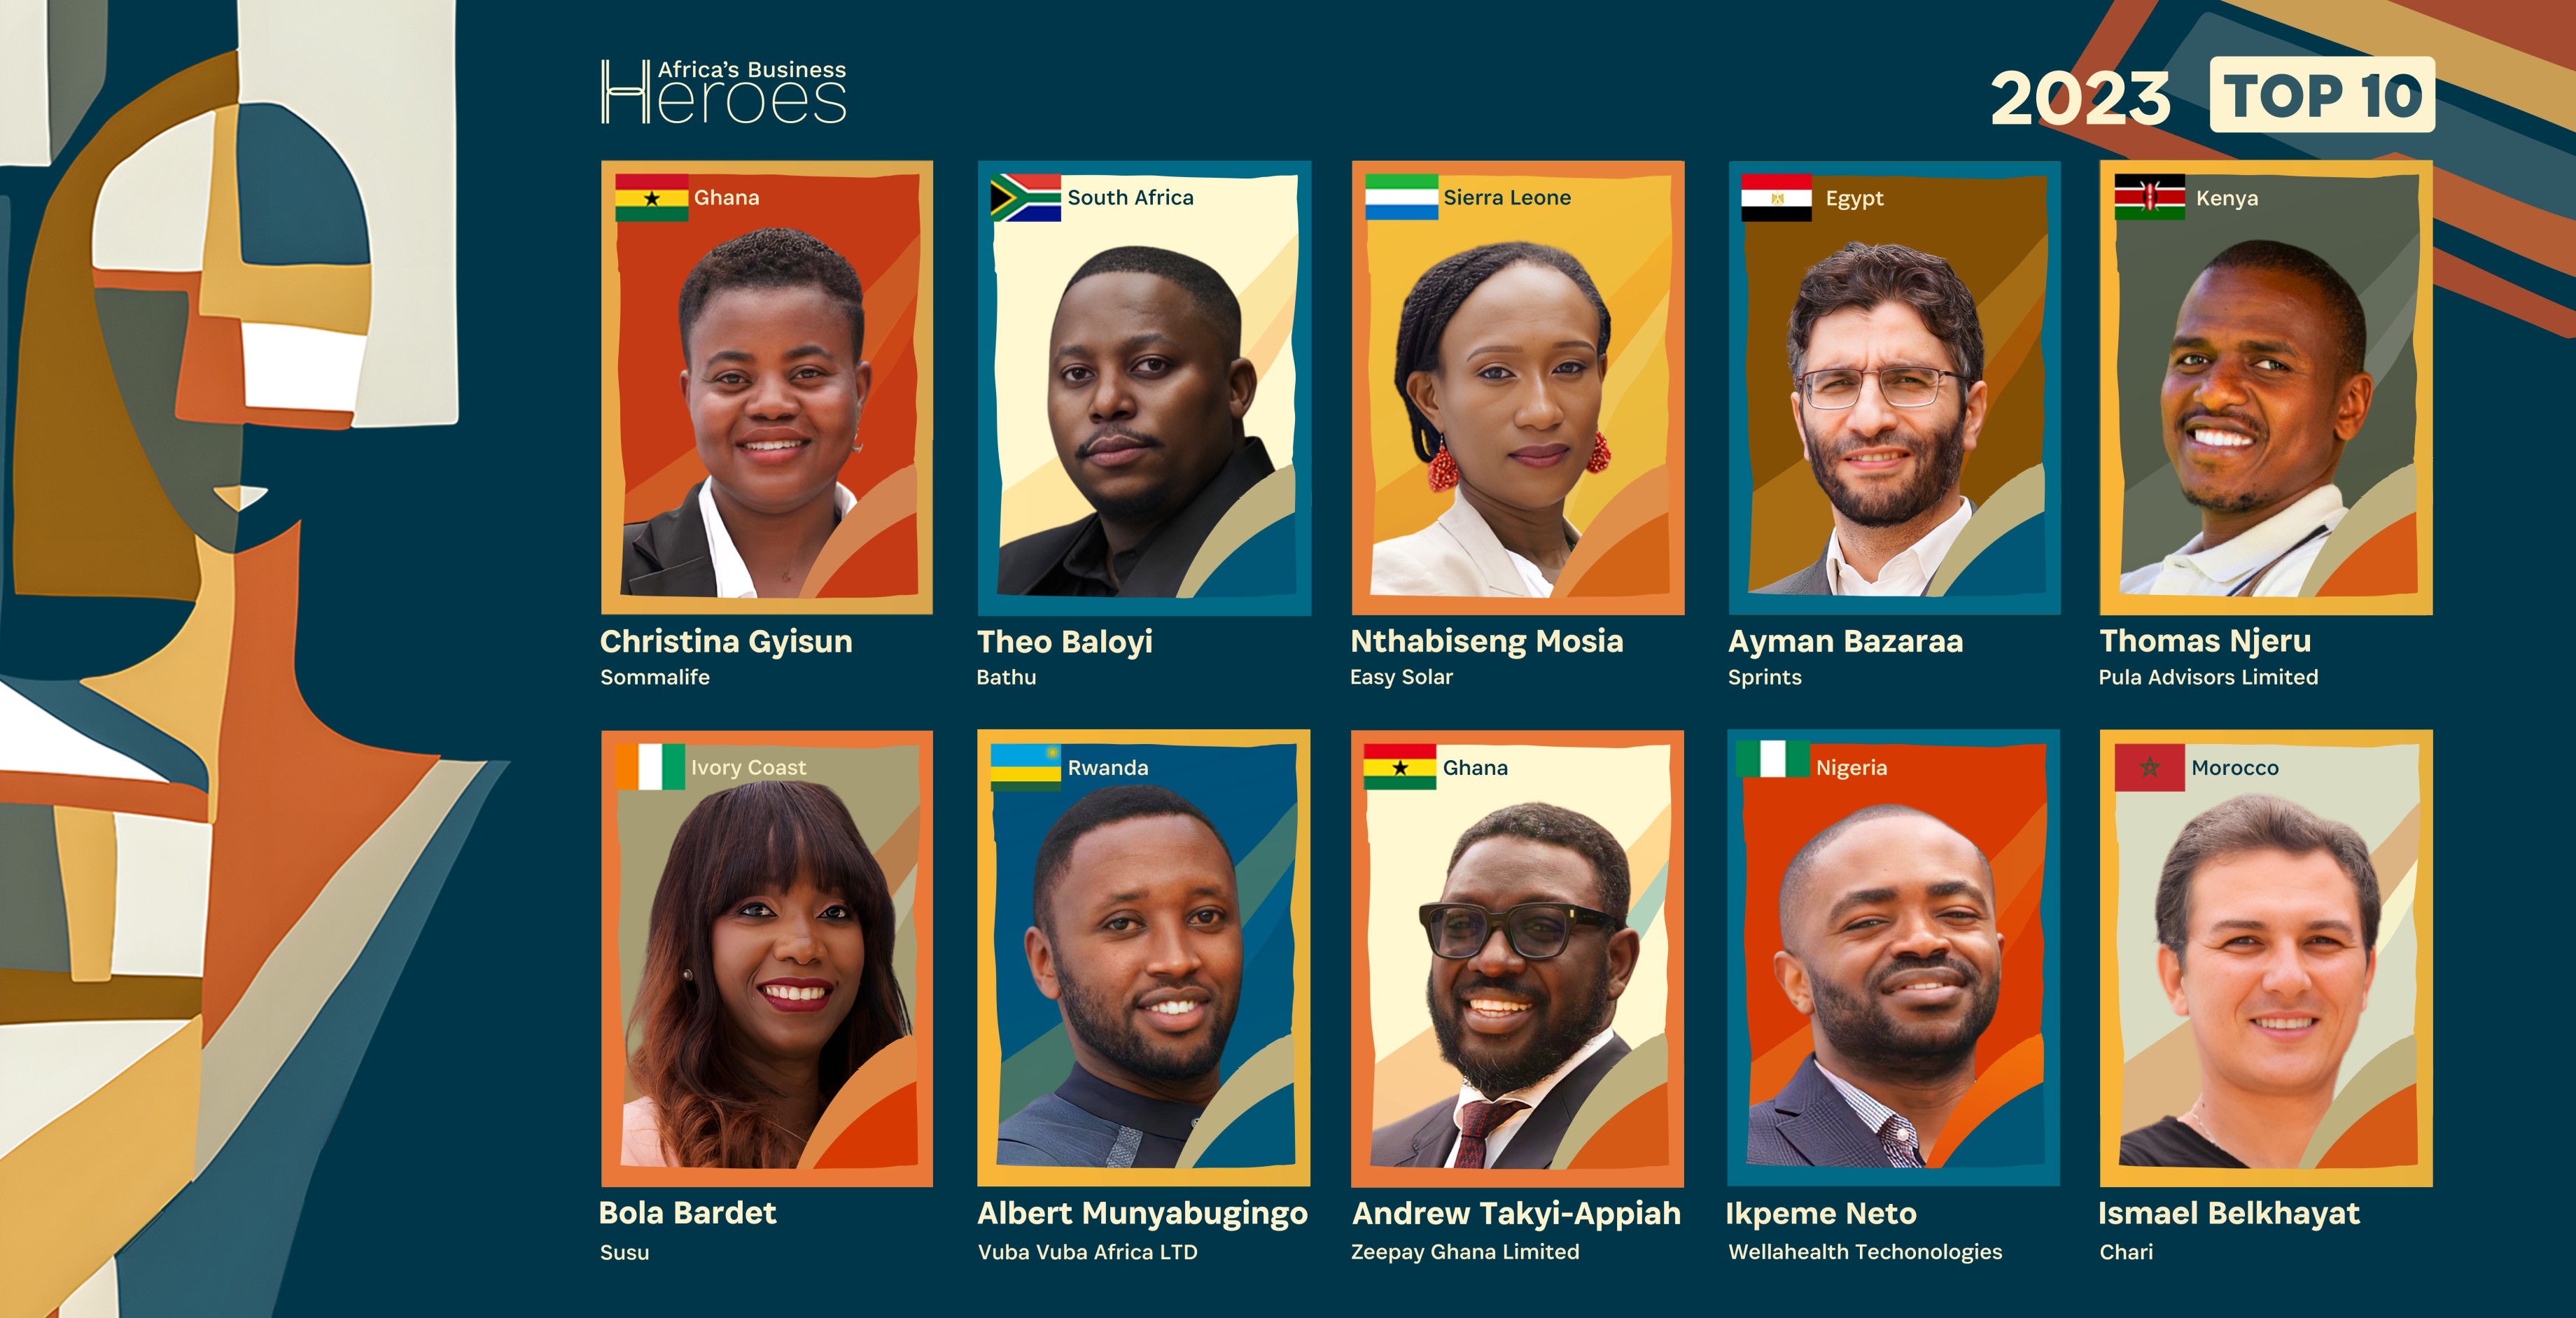 Africa’s Business Heroes Annonce ses dix Finalistes 2023